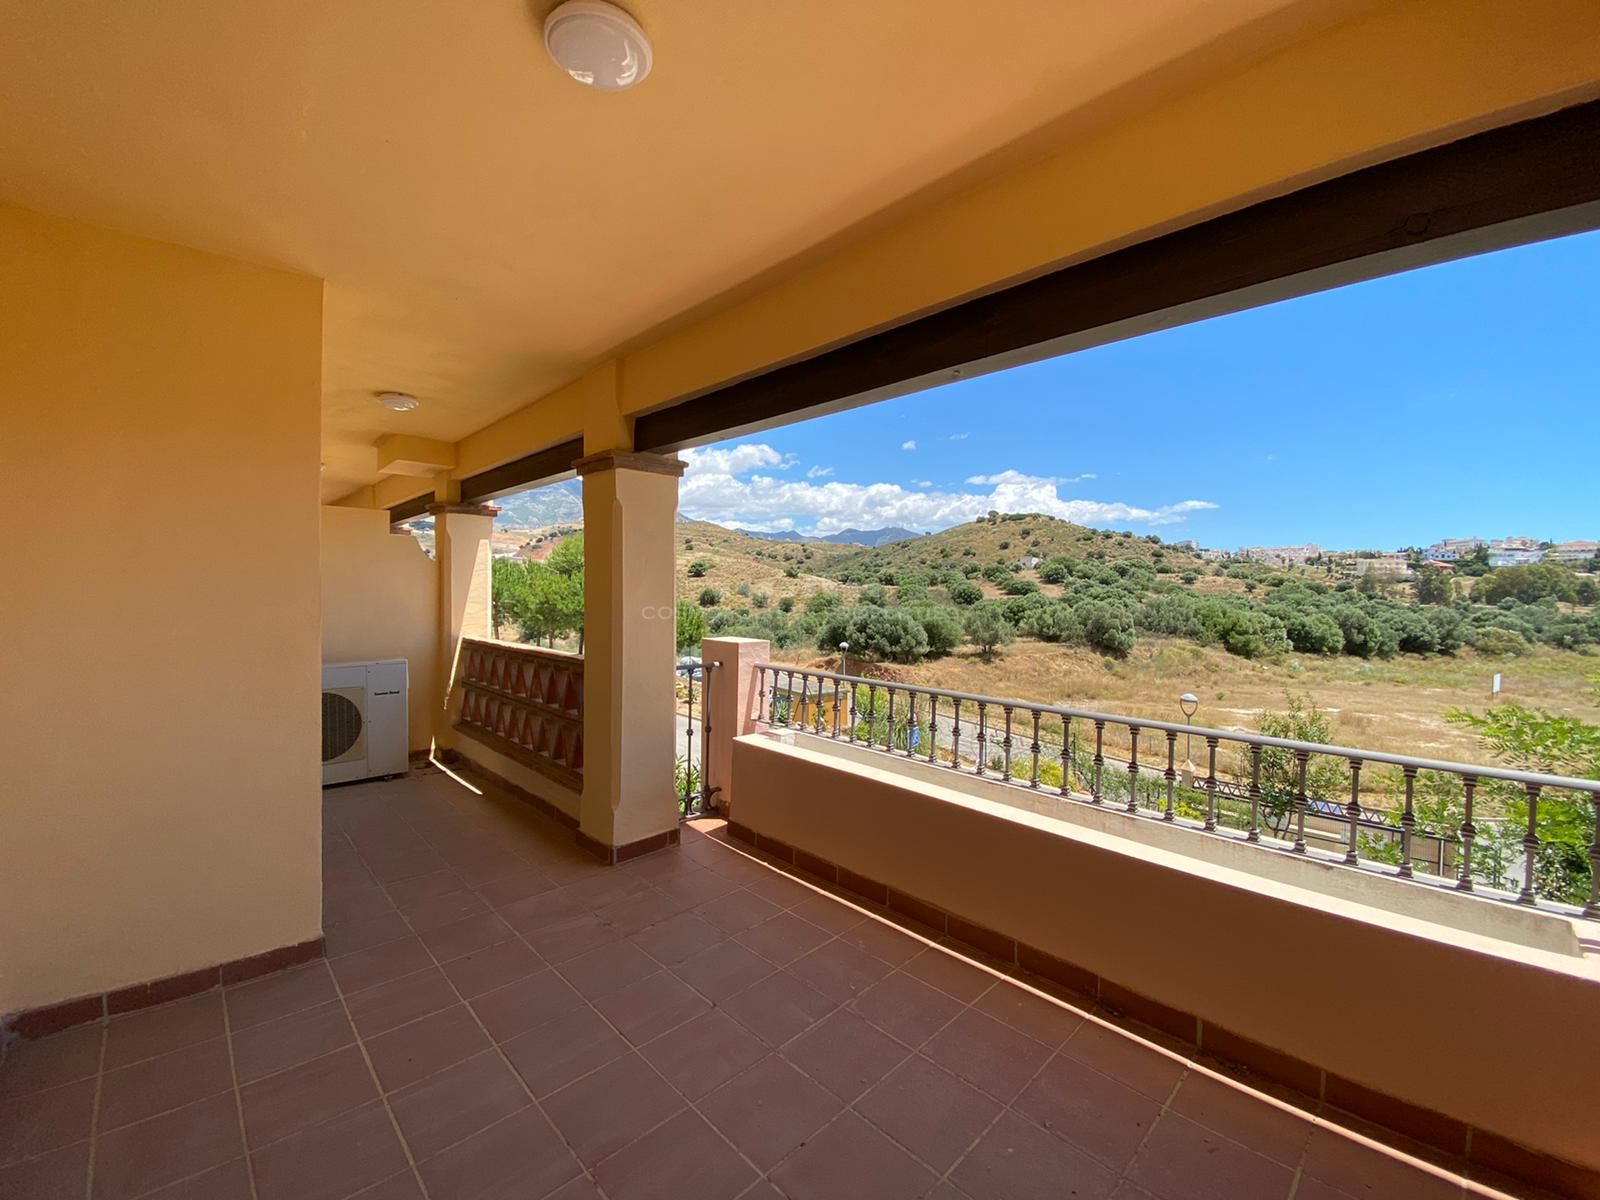 Apartments with big terraces and nice views close to Fuengirola city